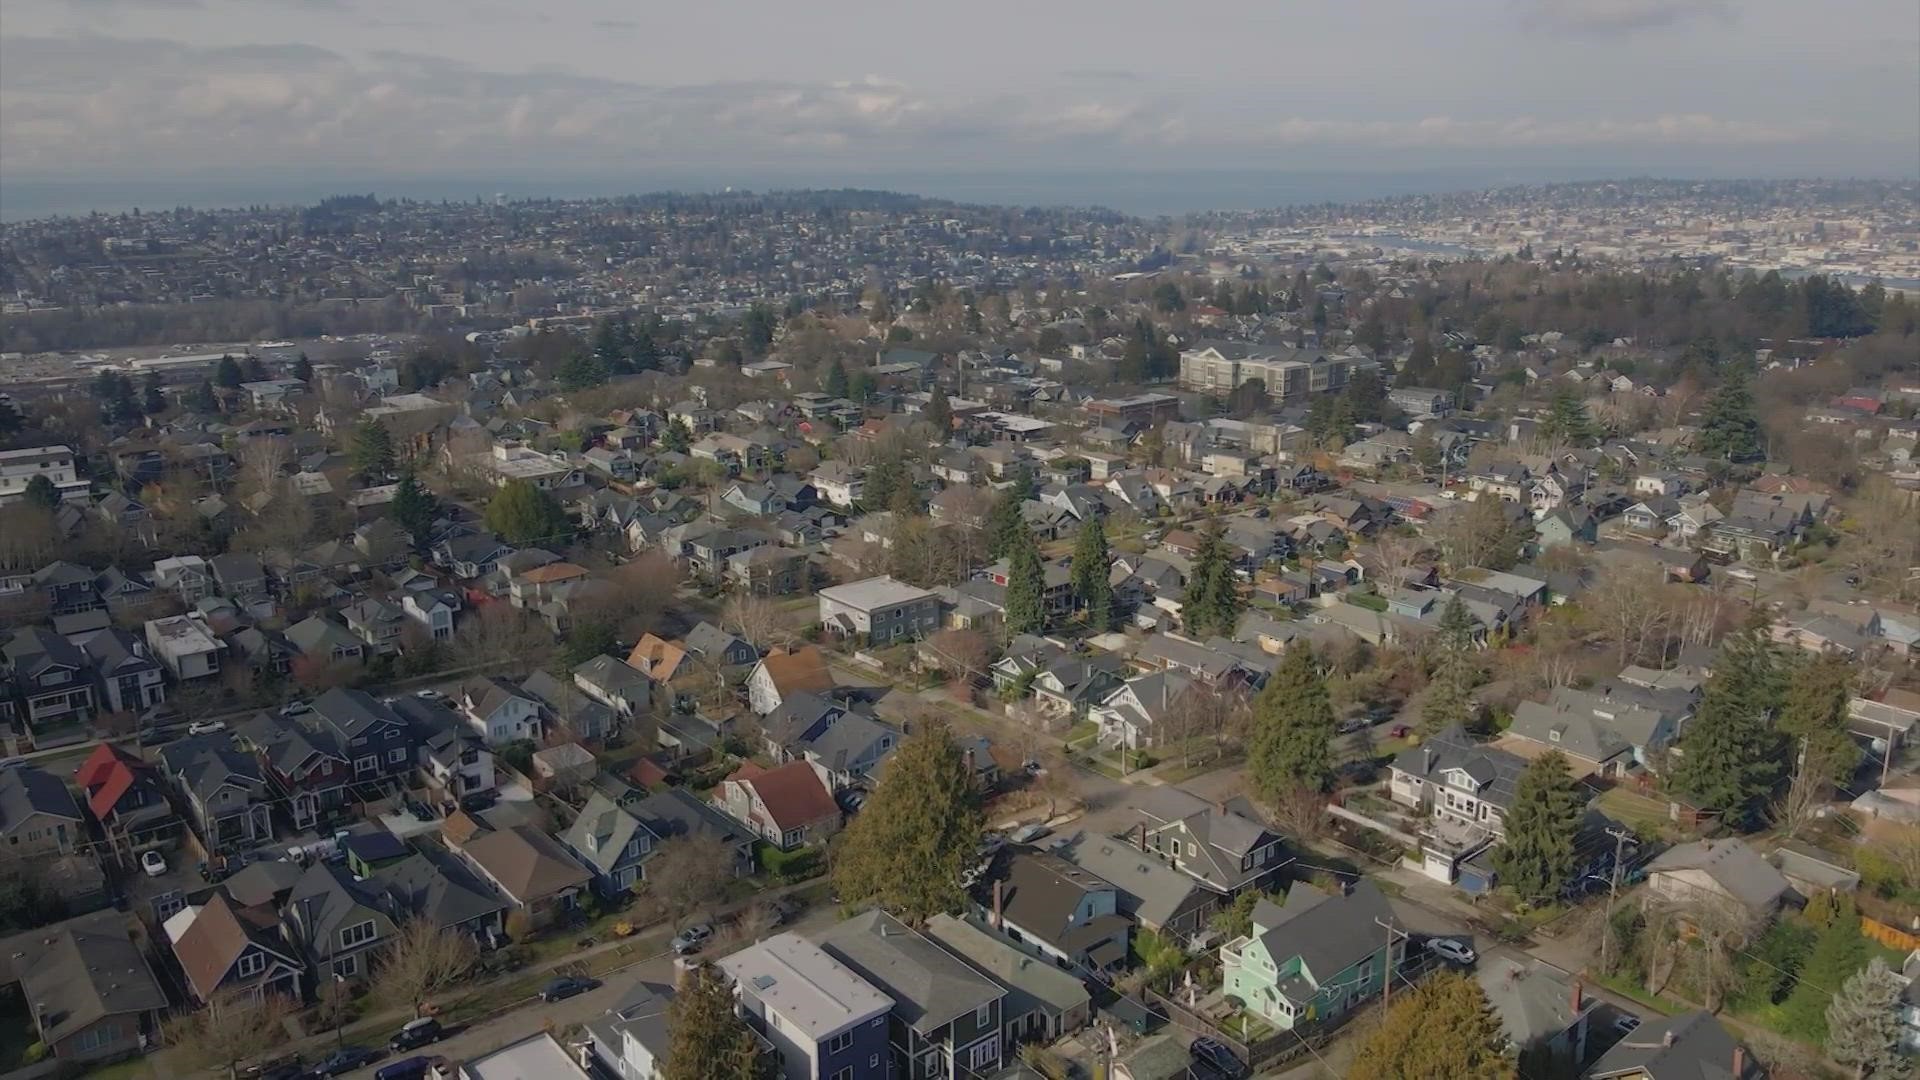 The City of Seattle says its latest Tree Canopy Assessment shows the city has lost 255 acres of tree canopy since 2016, an area roughly equivalent to Green Lake.